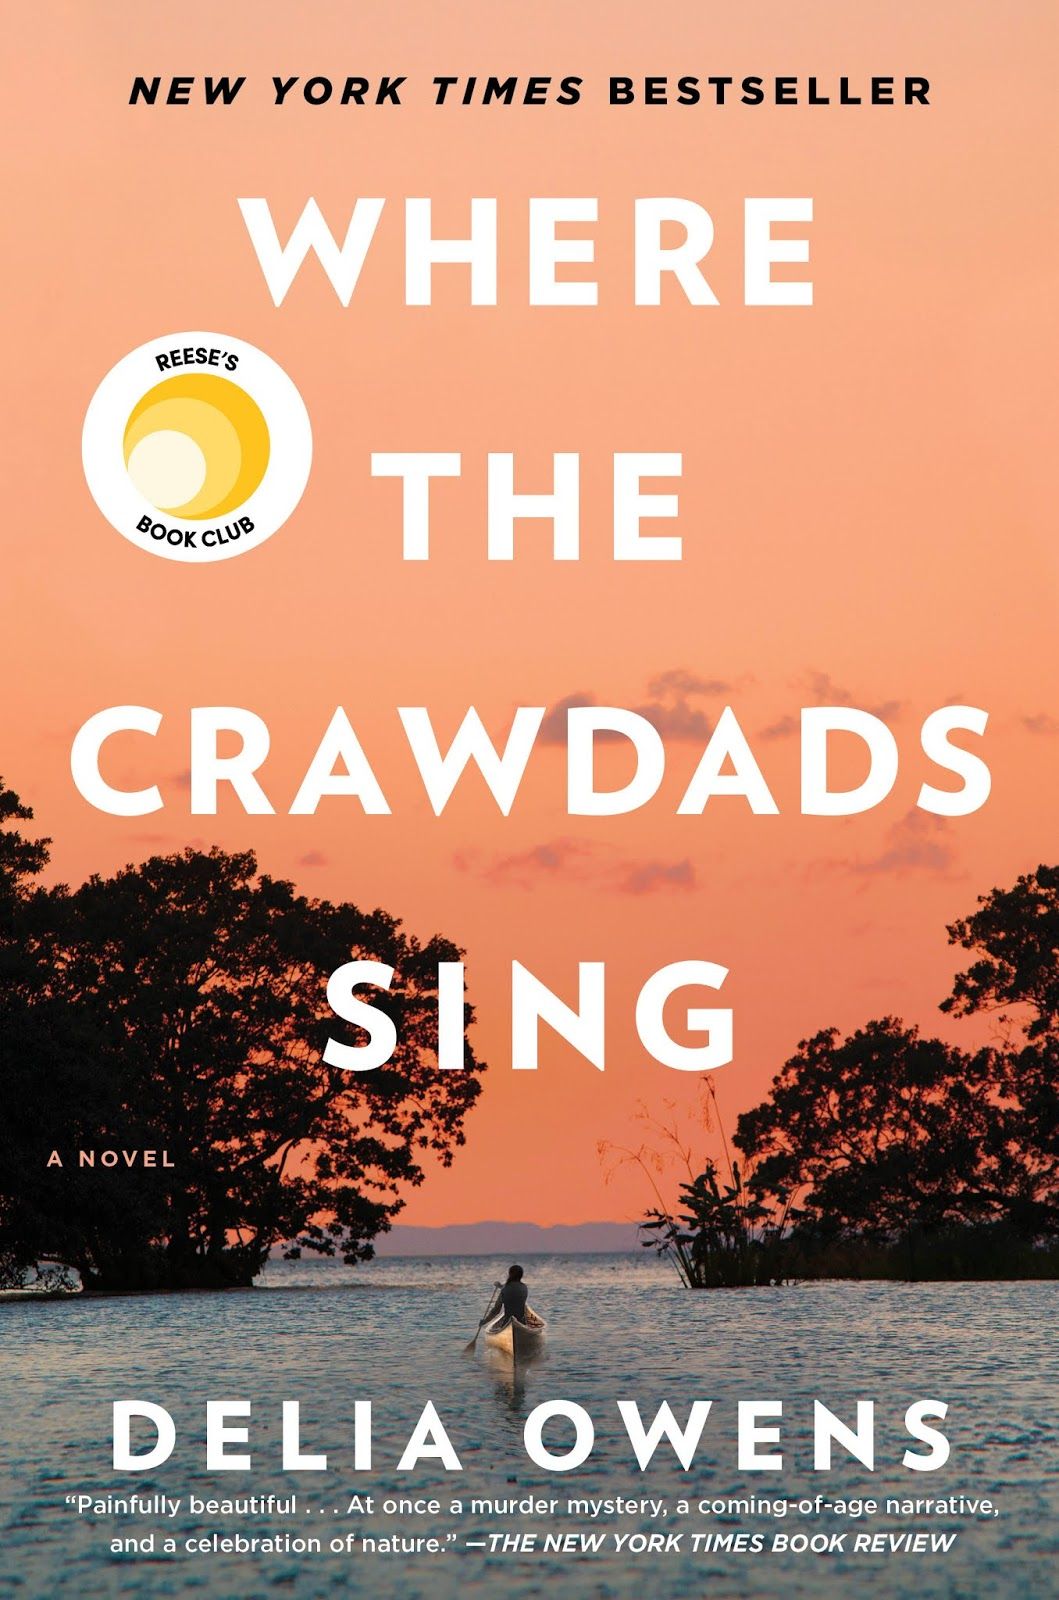 “Where the Crawdads Sing”: The Cinematic Marsh